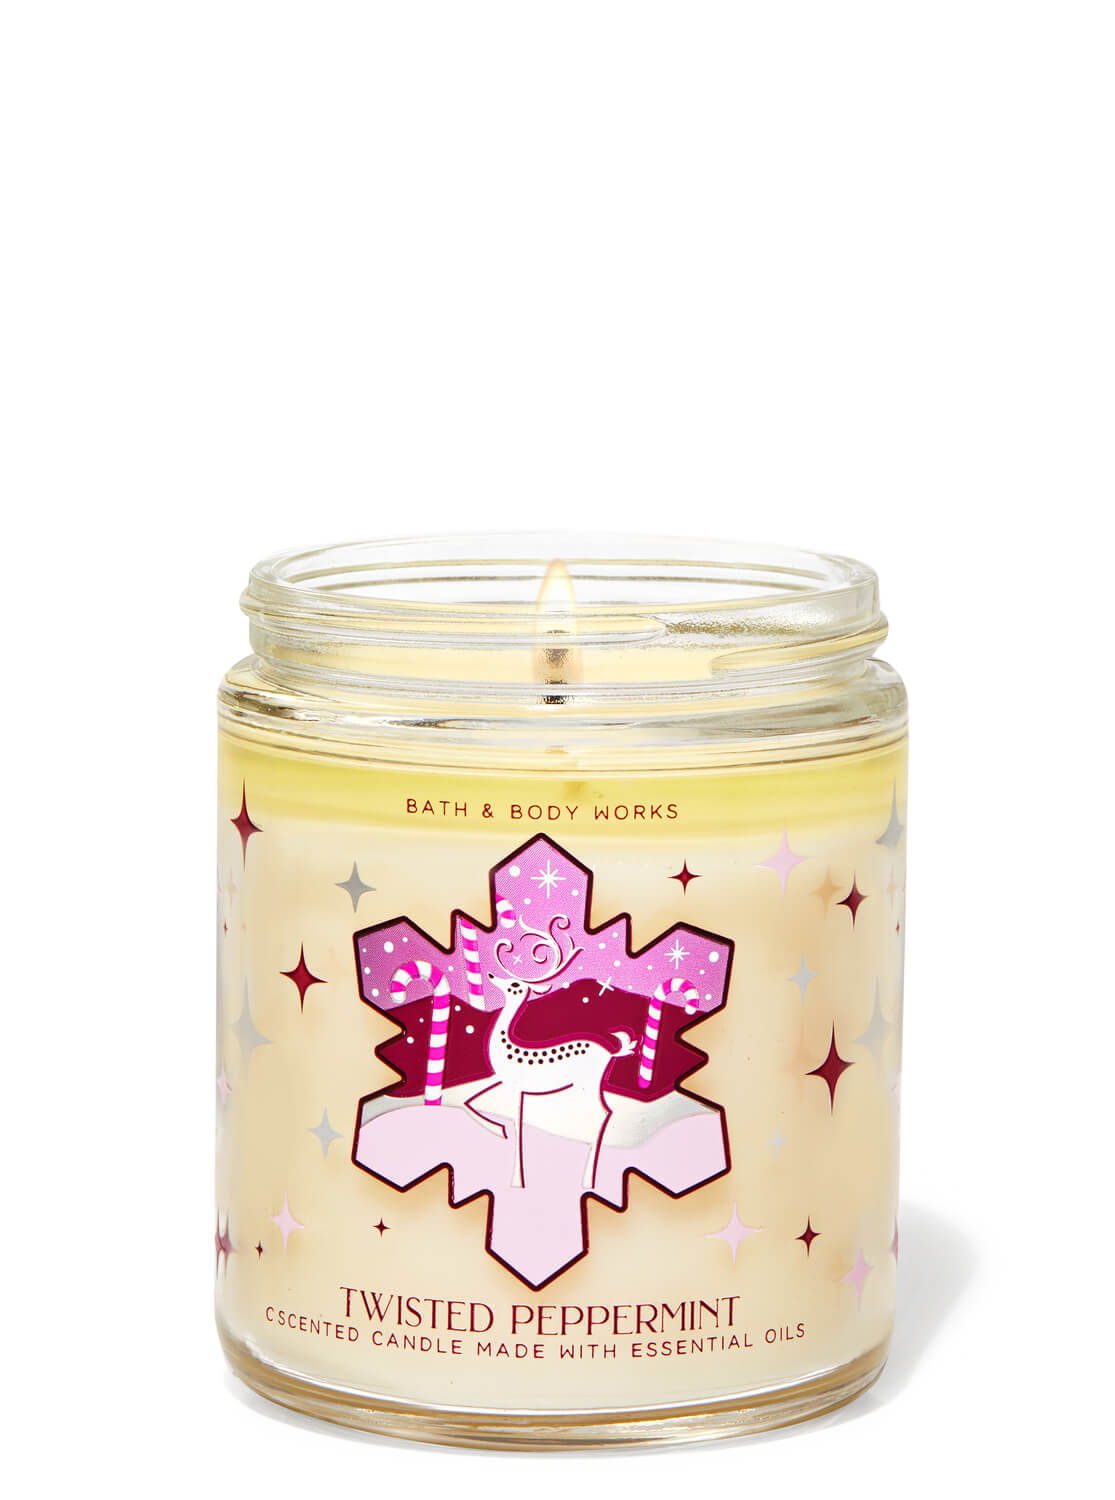 Bath & Body Works Twisted Peppermint Single Wick Candle